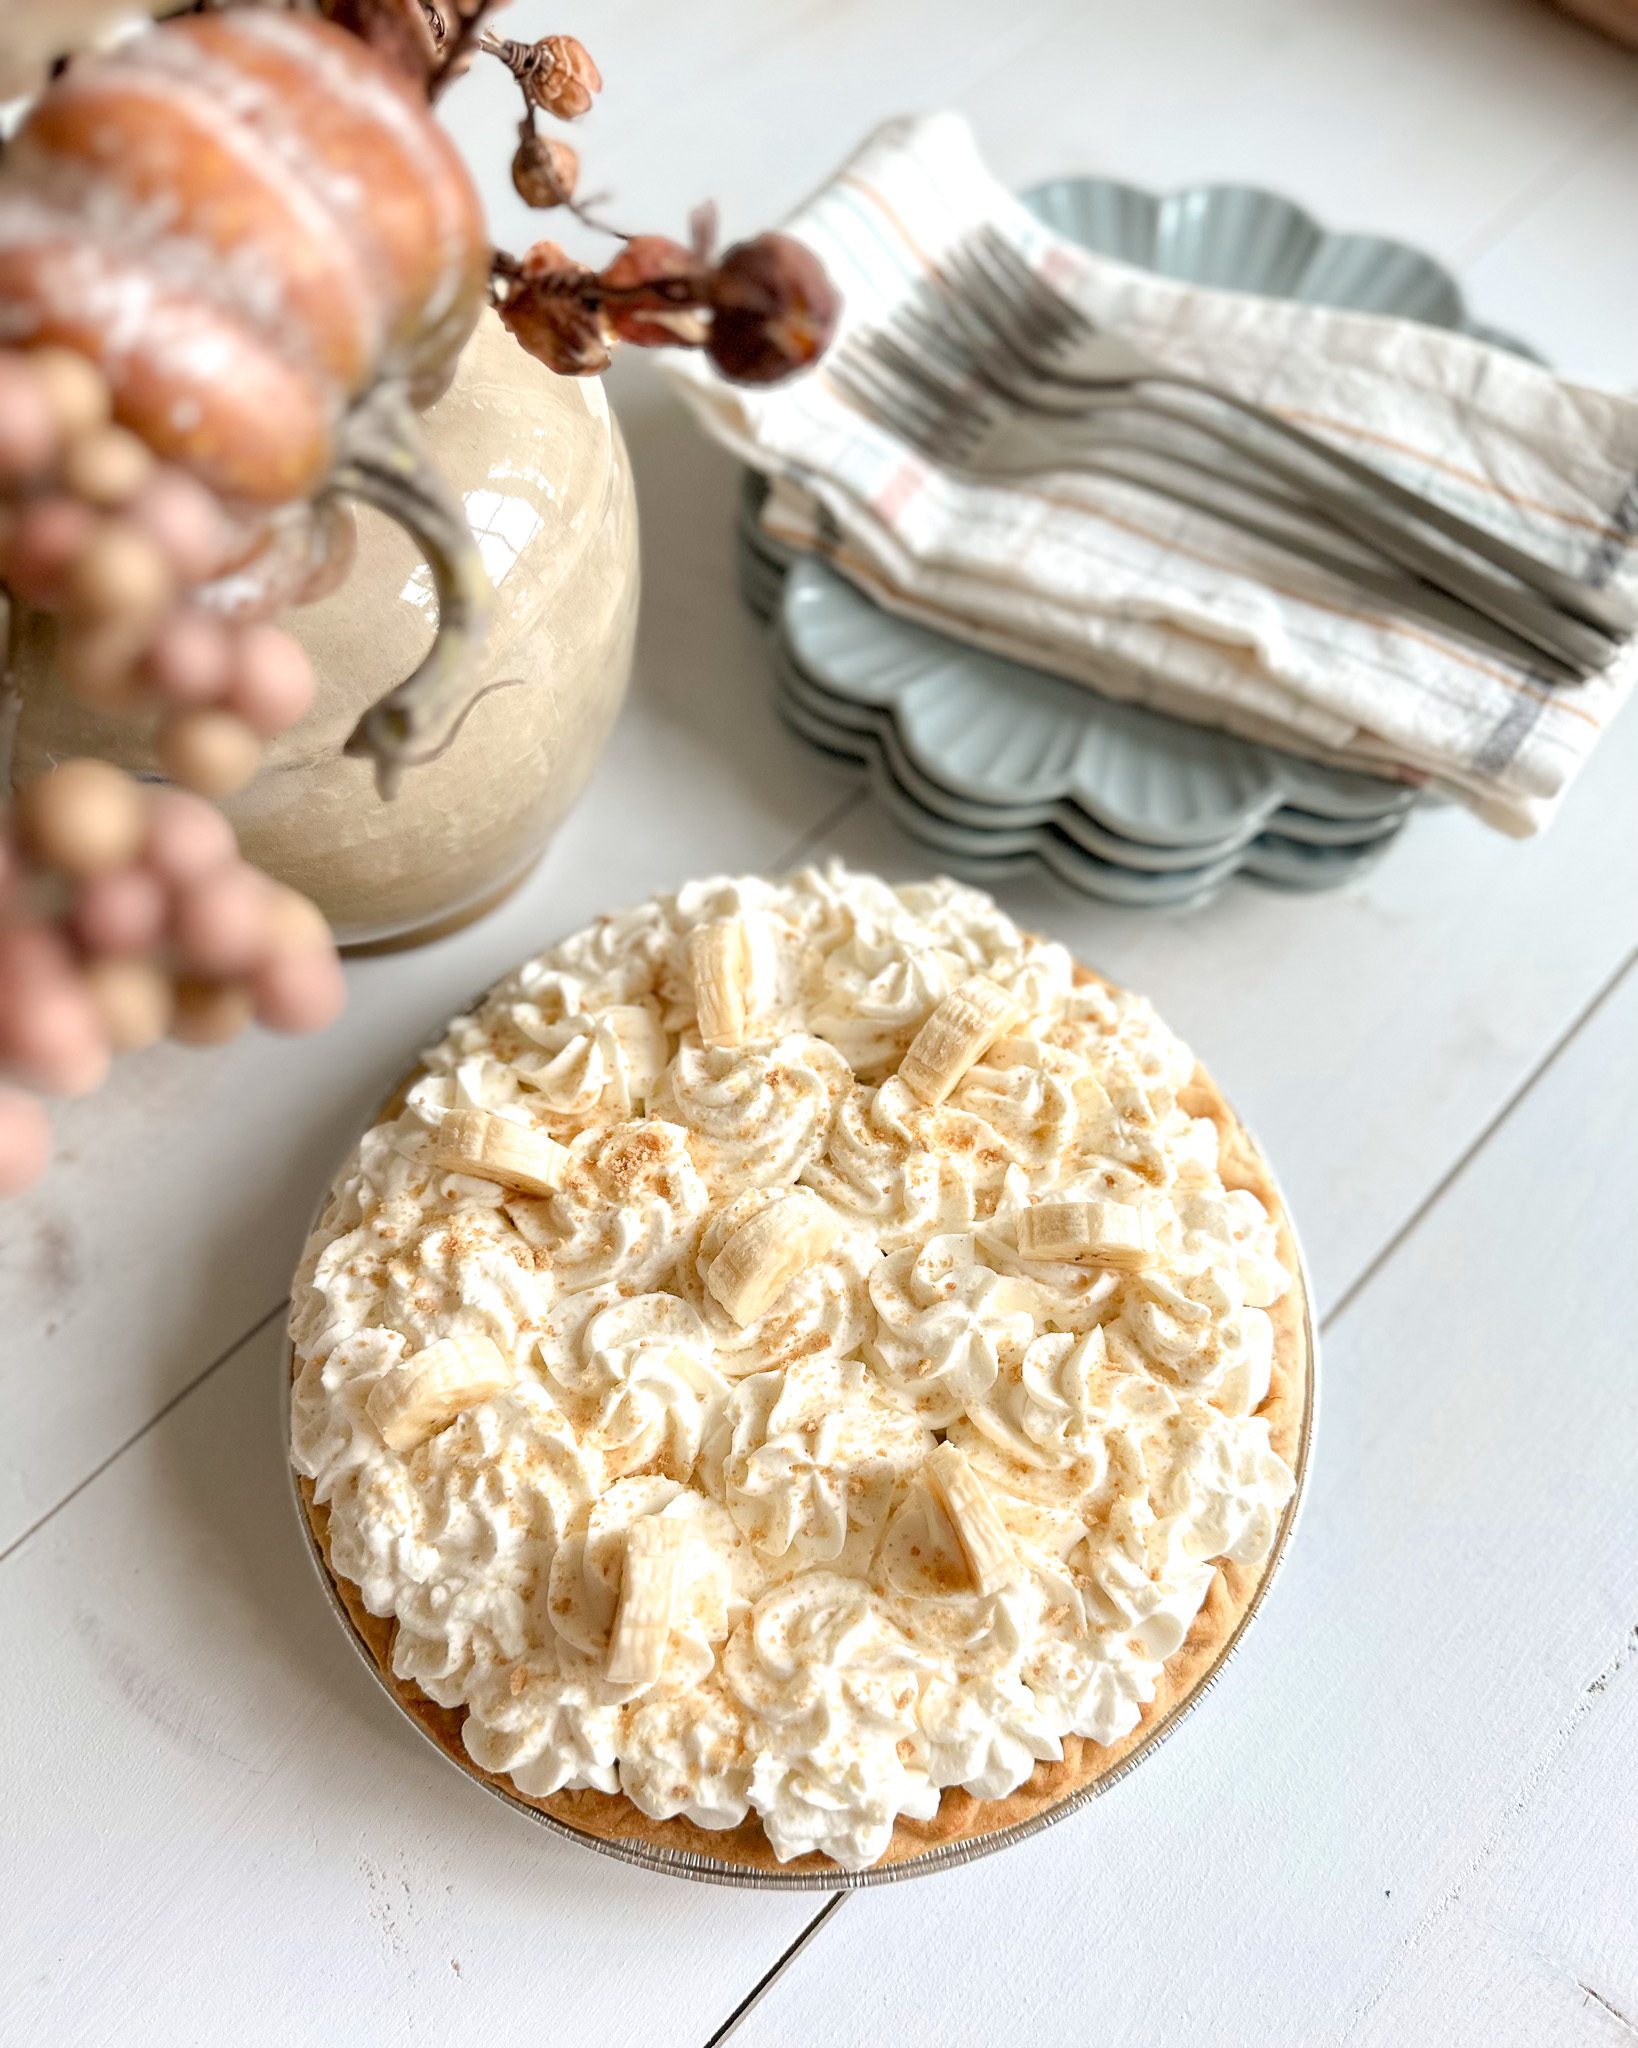 Learn how to make my homemade banana cream pie recipe that is a family favorite and so easy to make. Read more here.